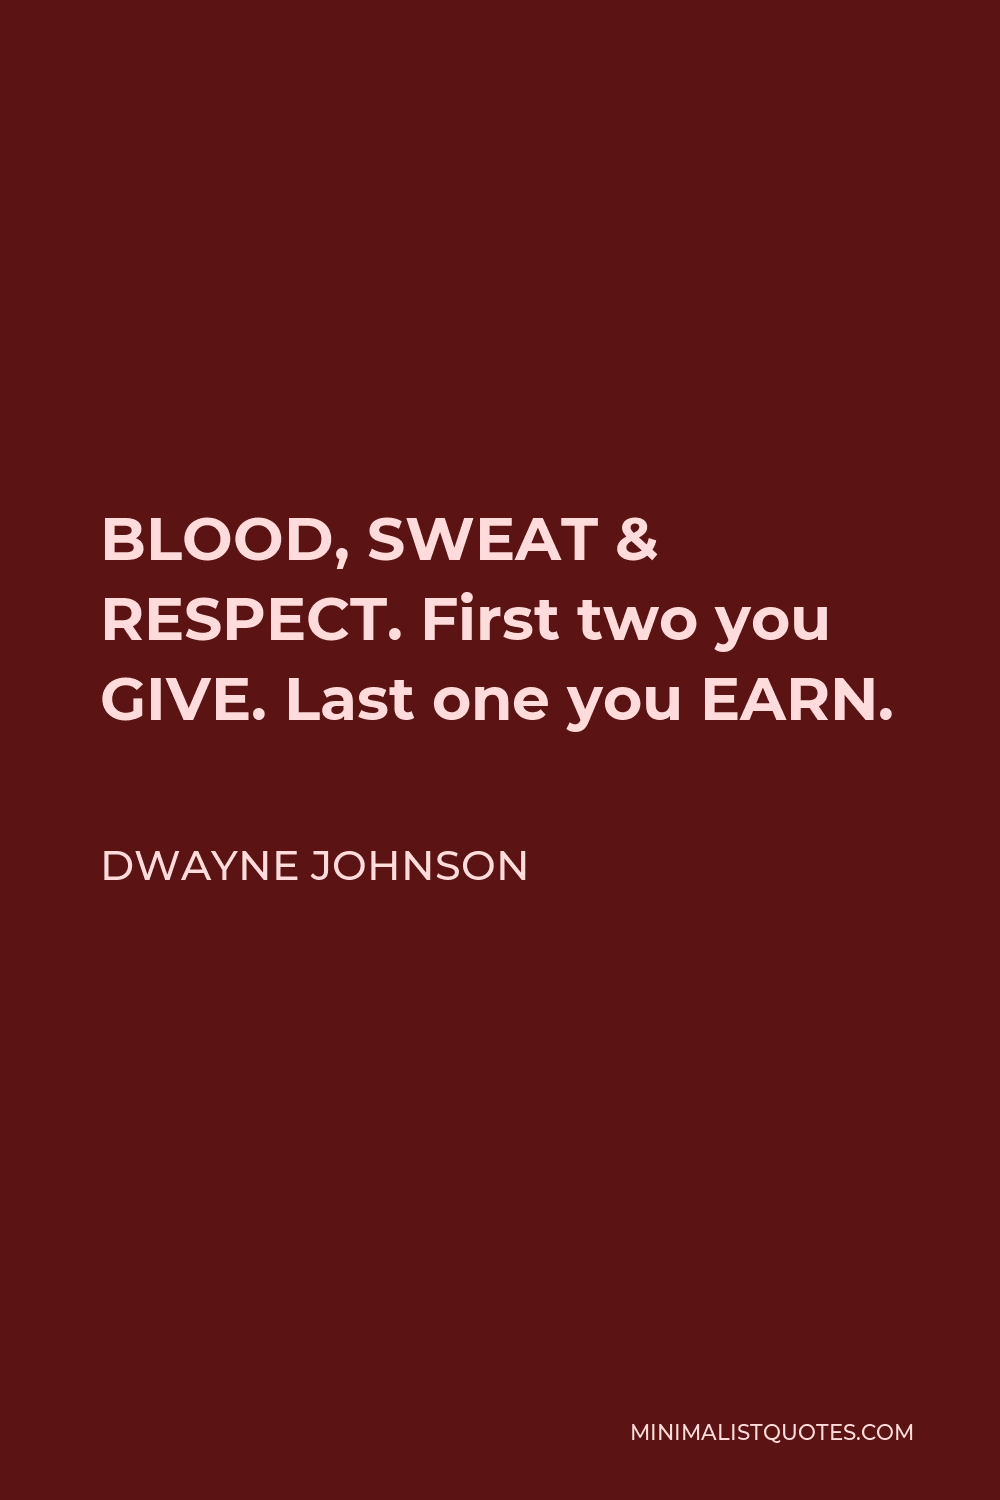 Dwayne Johnson Quote - BLOOD, SWEAT & RESPECT. First two you GIVE. Last one you EARN.